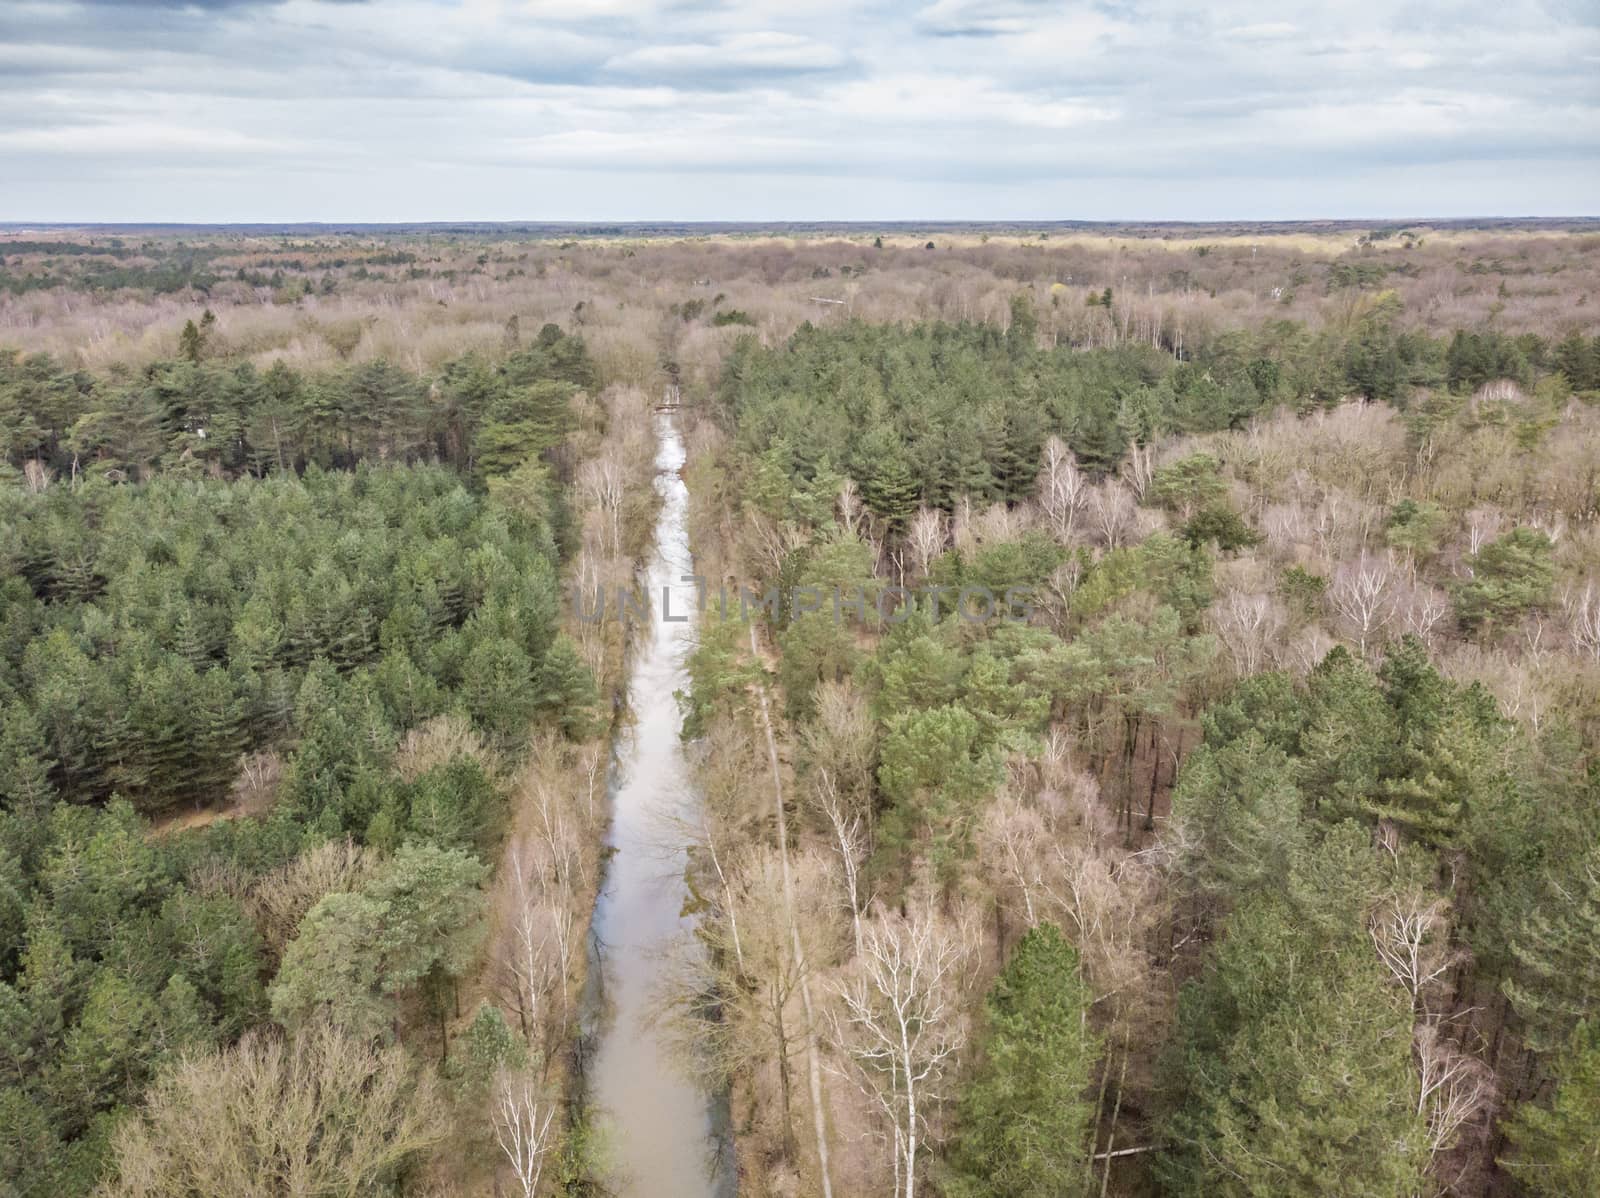 Aerial drone shot, of a forest with river or canal running through in early spring. by kb79